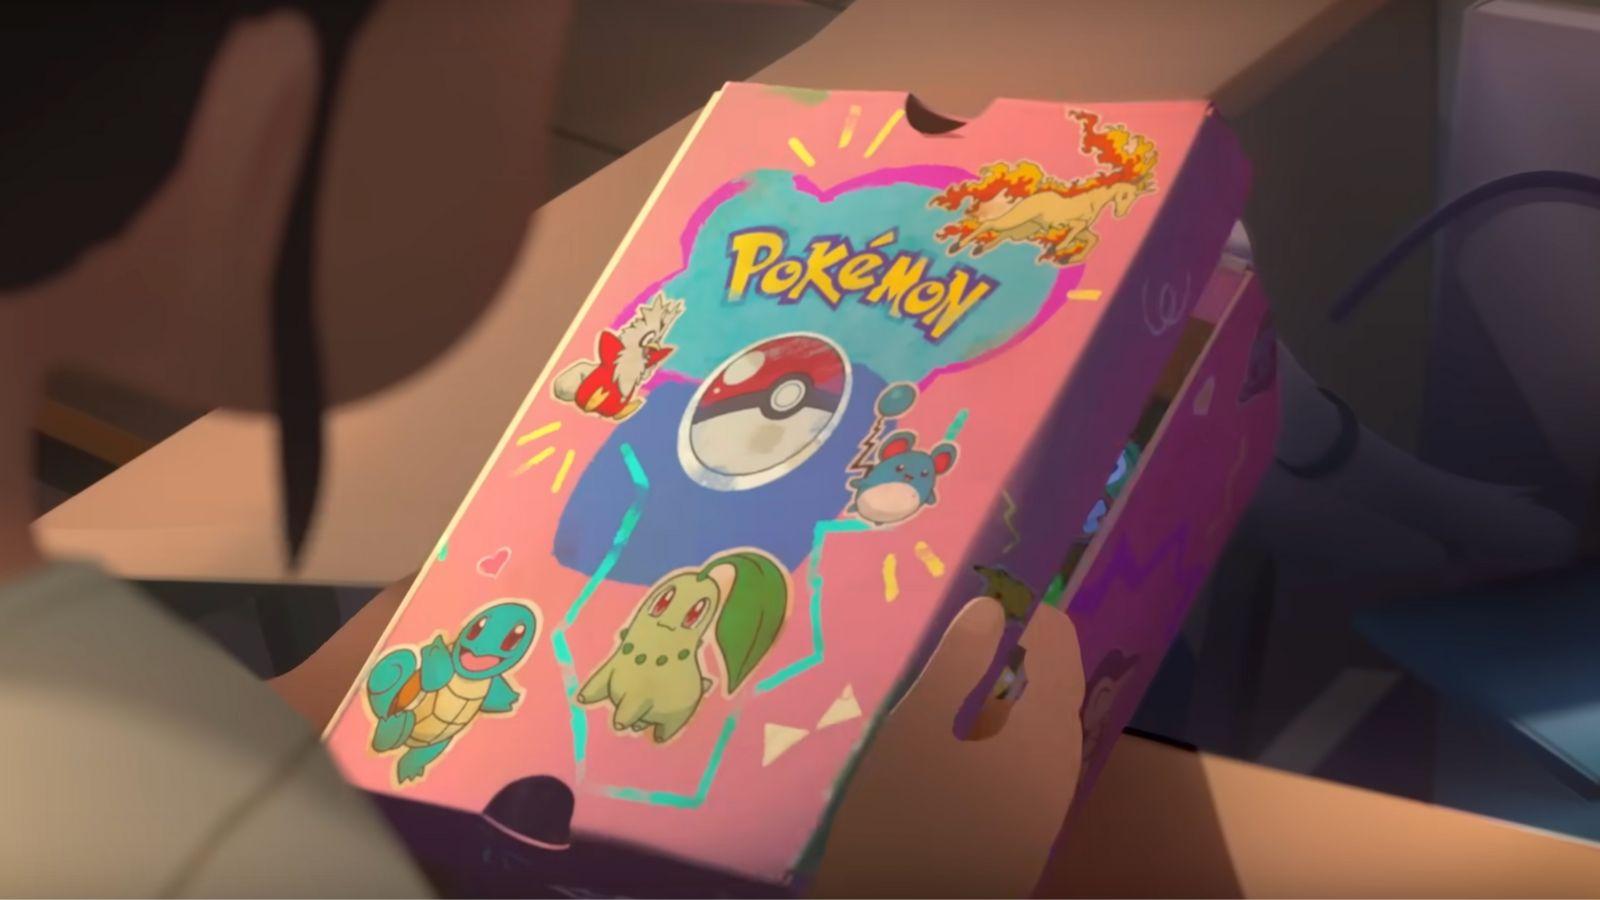 Scene from Path to the peak showing a cardboard box with Pokemon cards